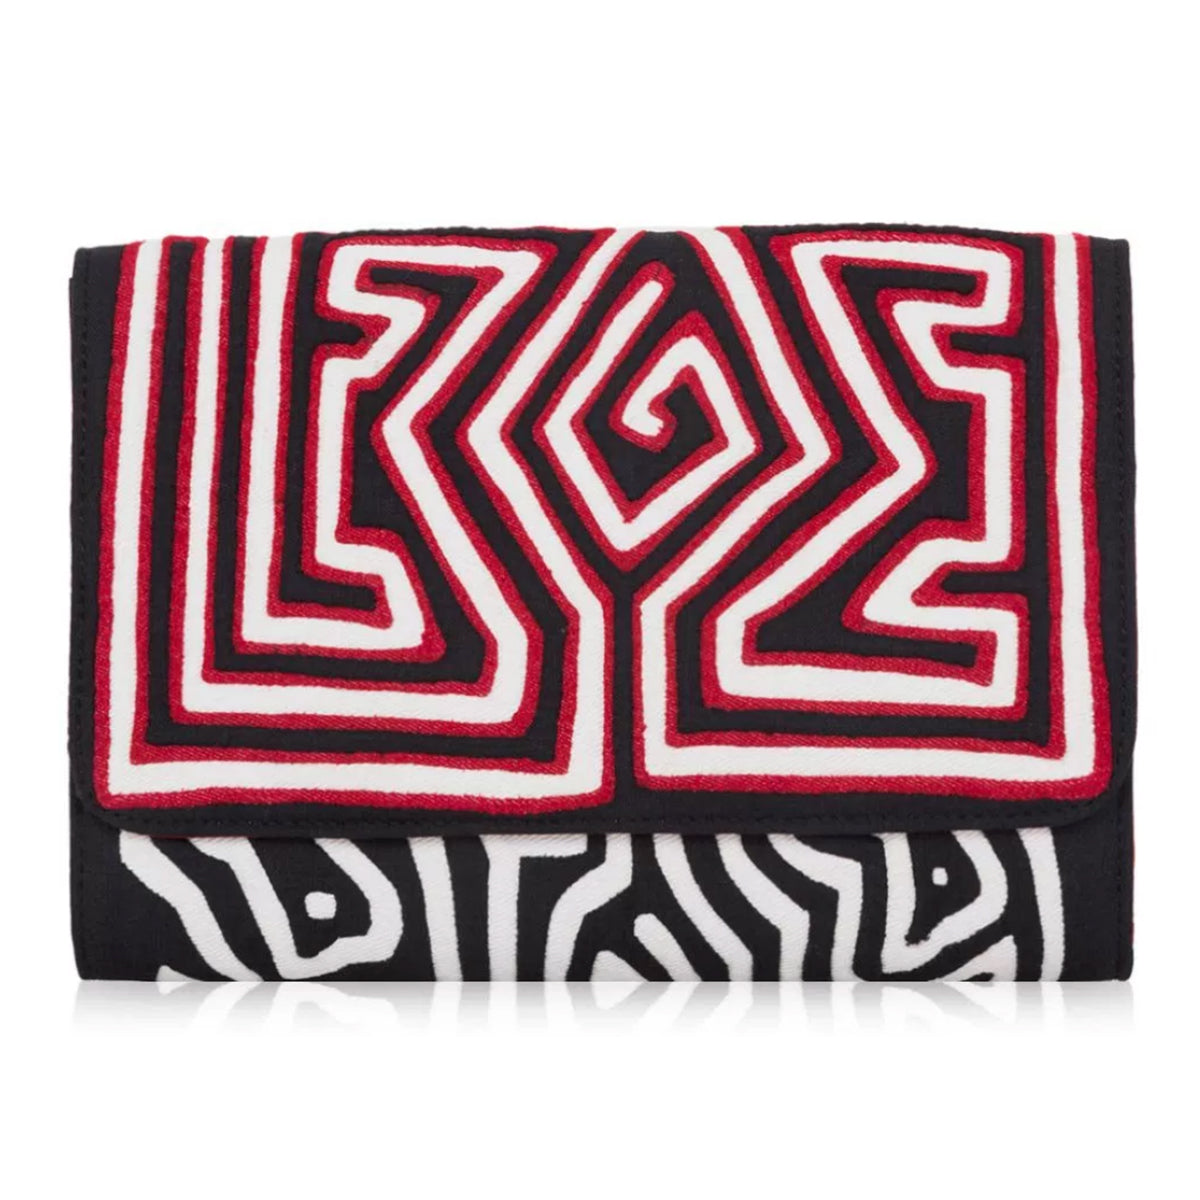 Mola Sasa clutch in dark grey and red. Handcrafted by artisans in Columbia with cotton and natural yute.